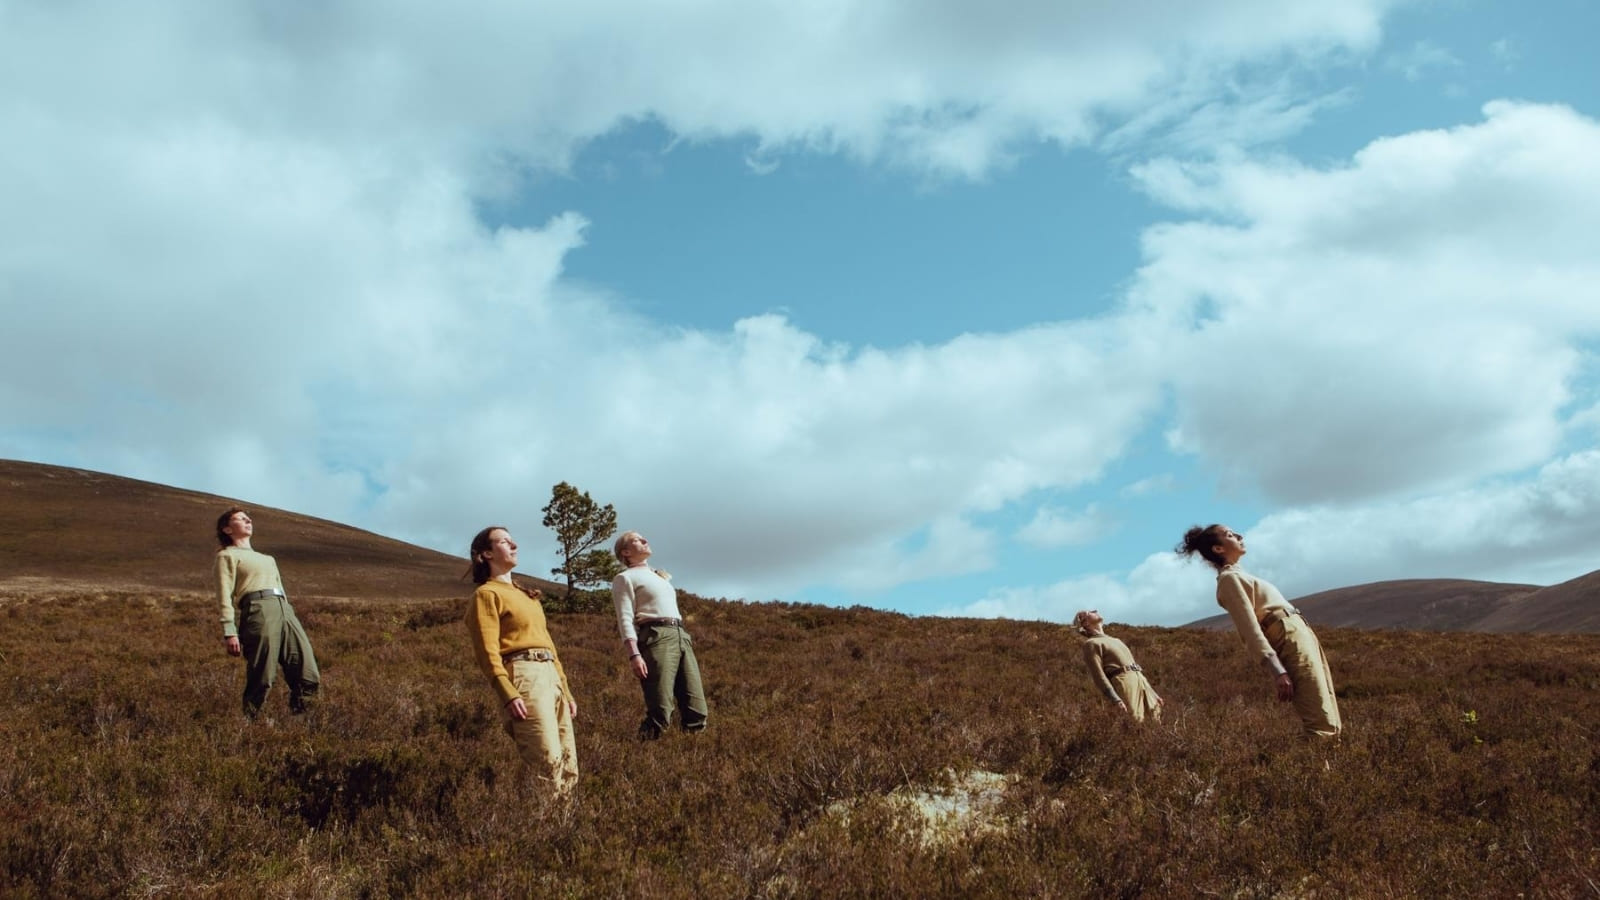 On a hillside against a blue sky, five people spread around in the foreground stand but lean back as though being blown by the wind